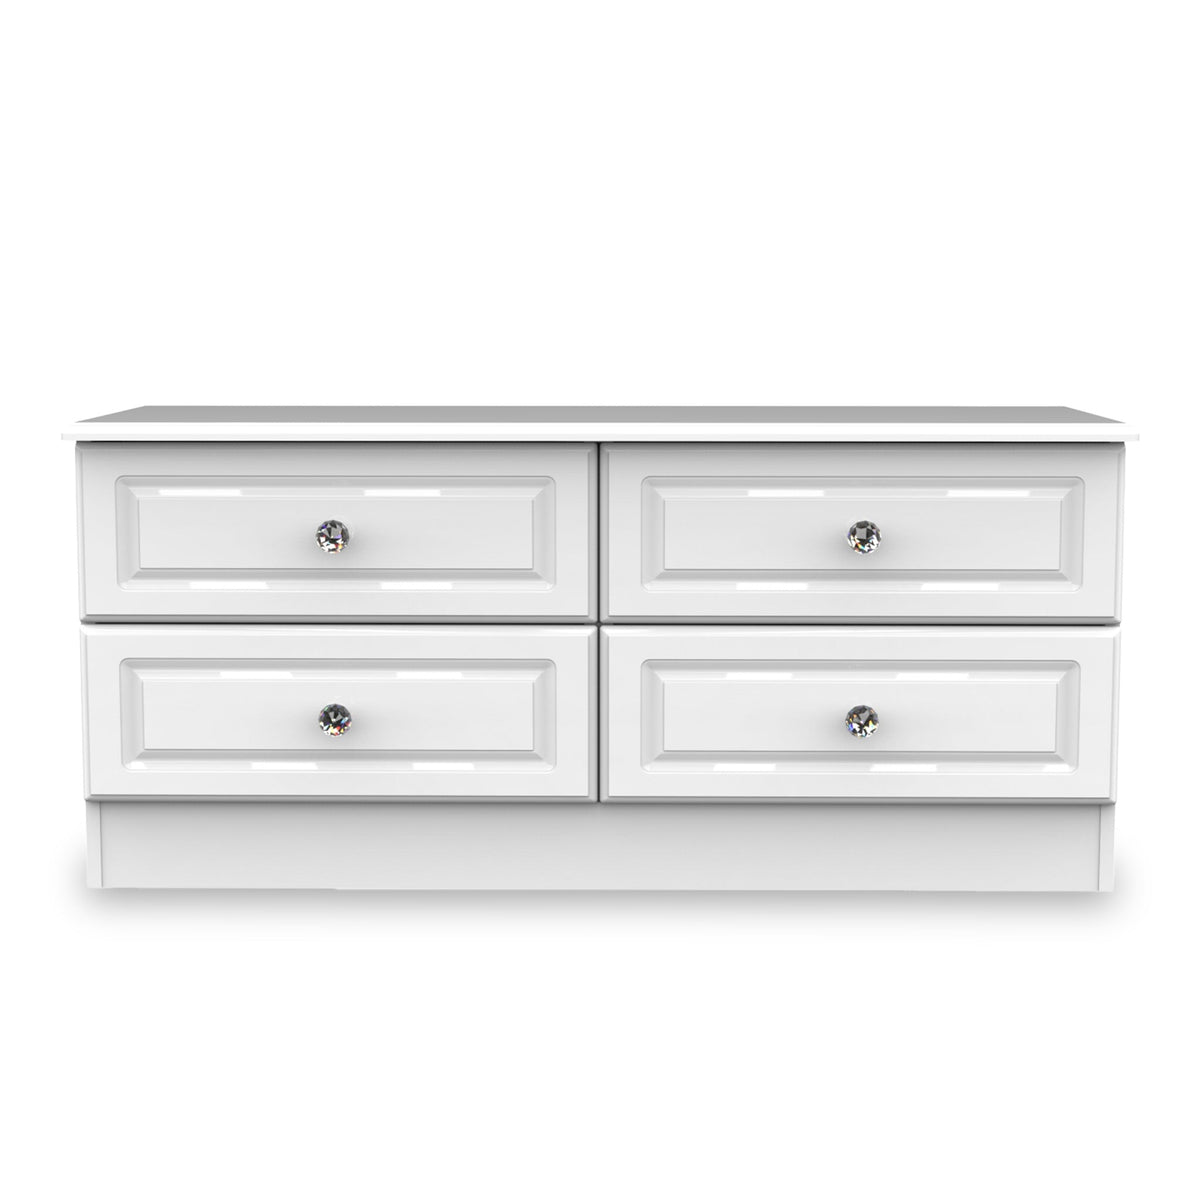 Kinsley White Gloss 4 Drawer Low Storage Unit from Roseland